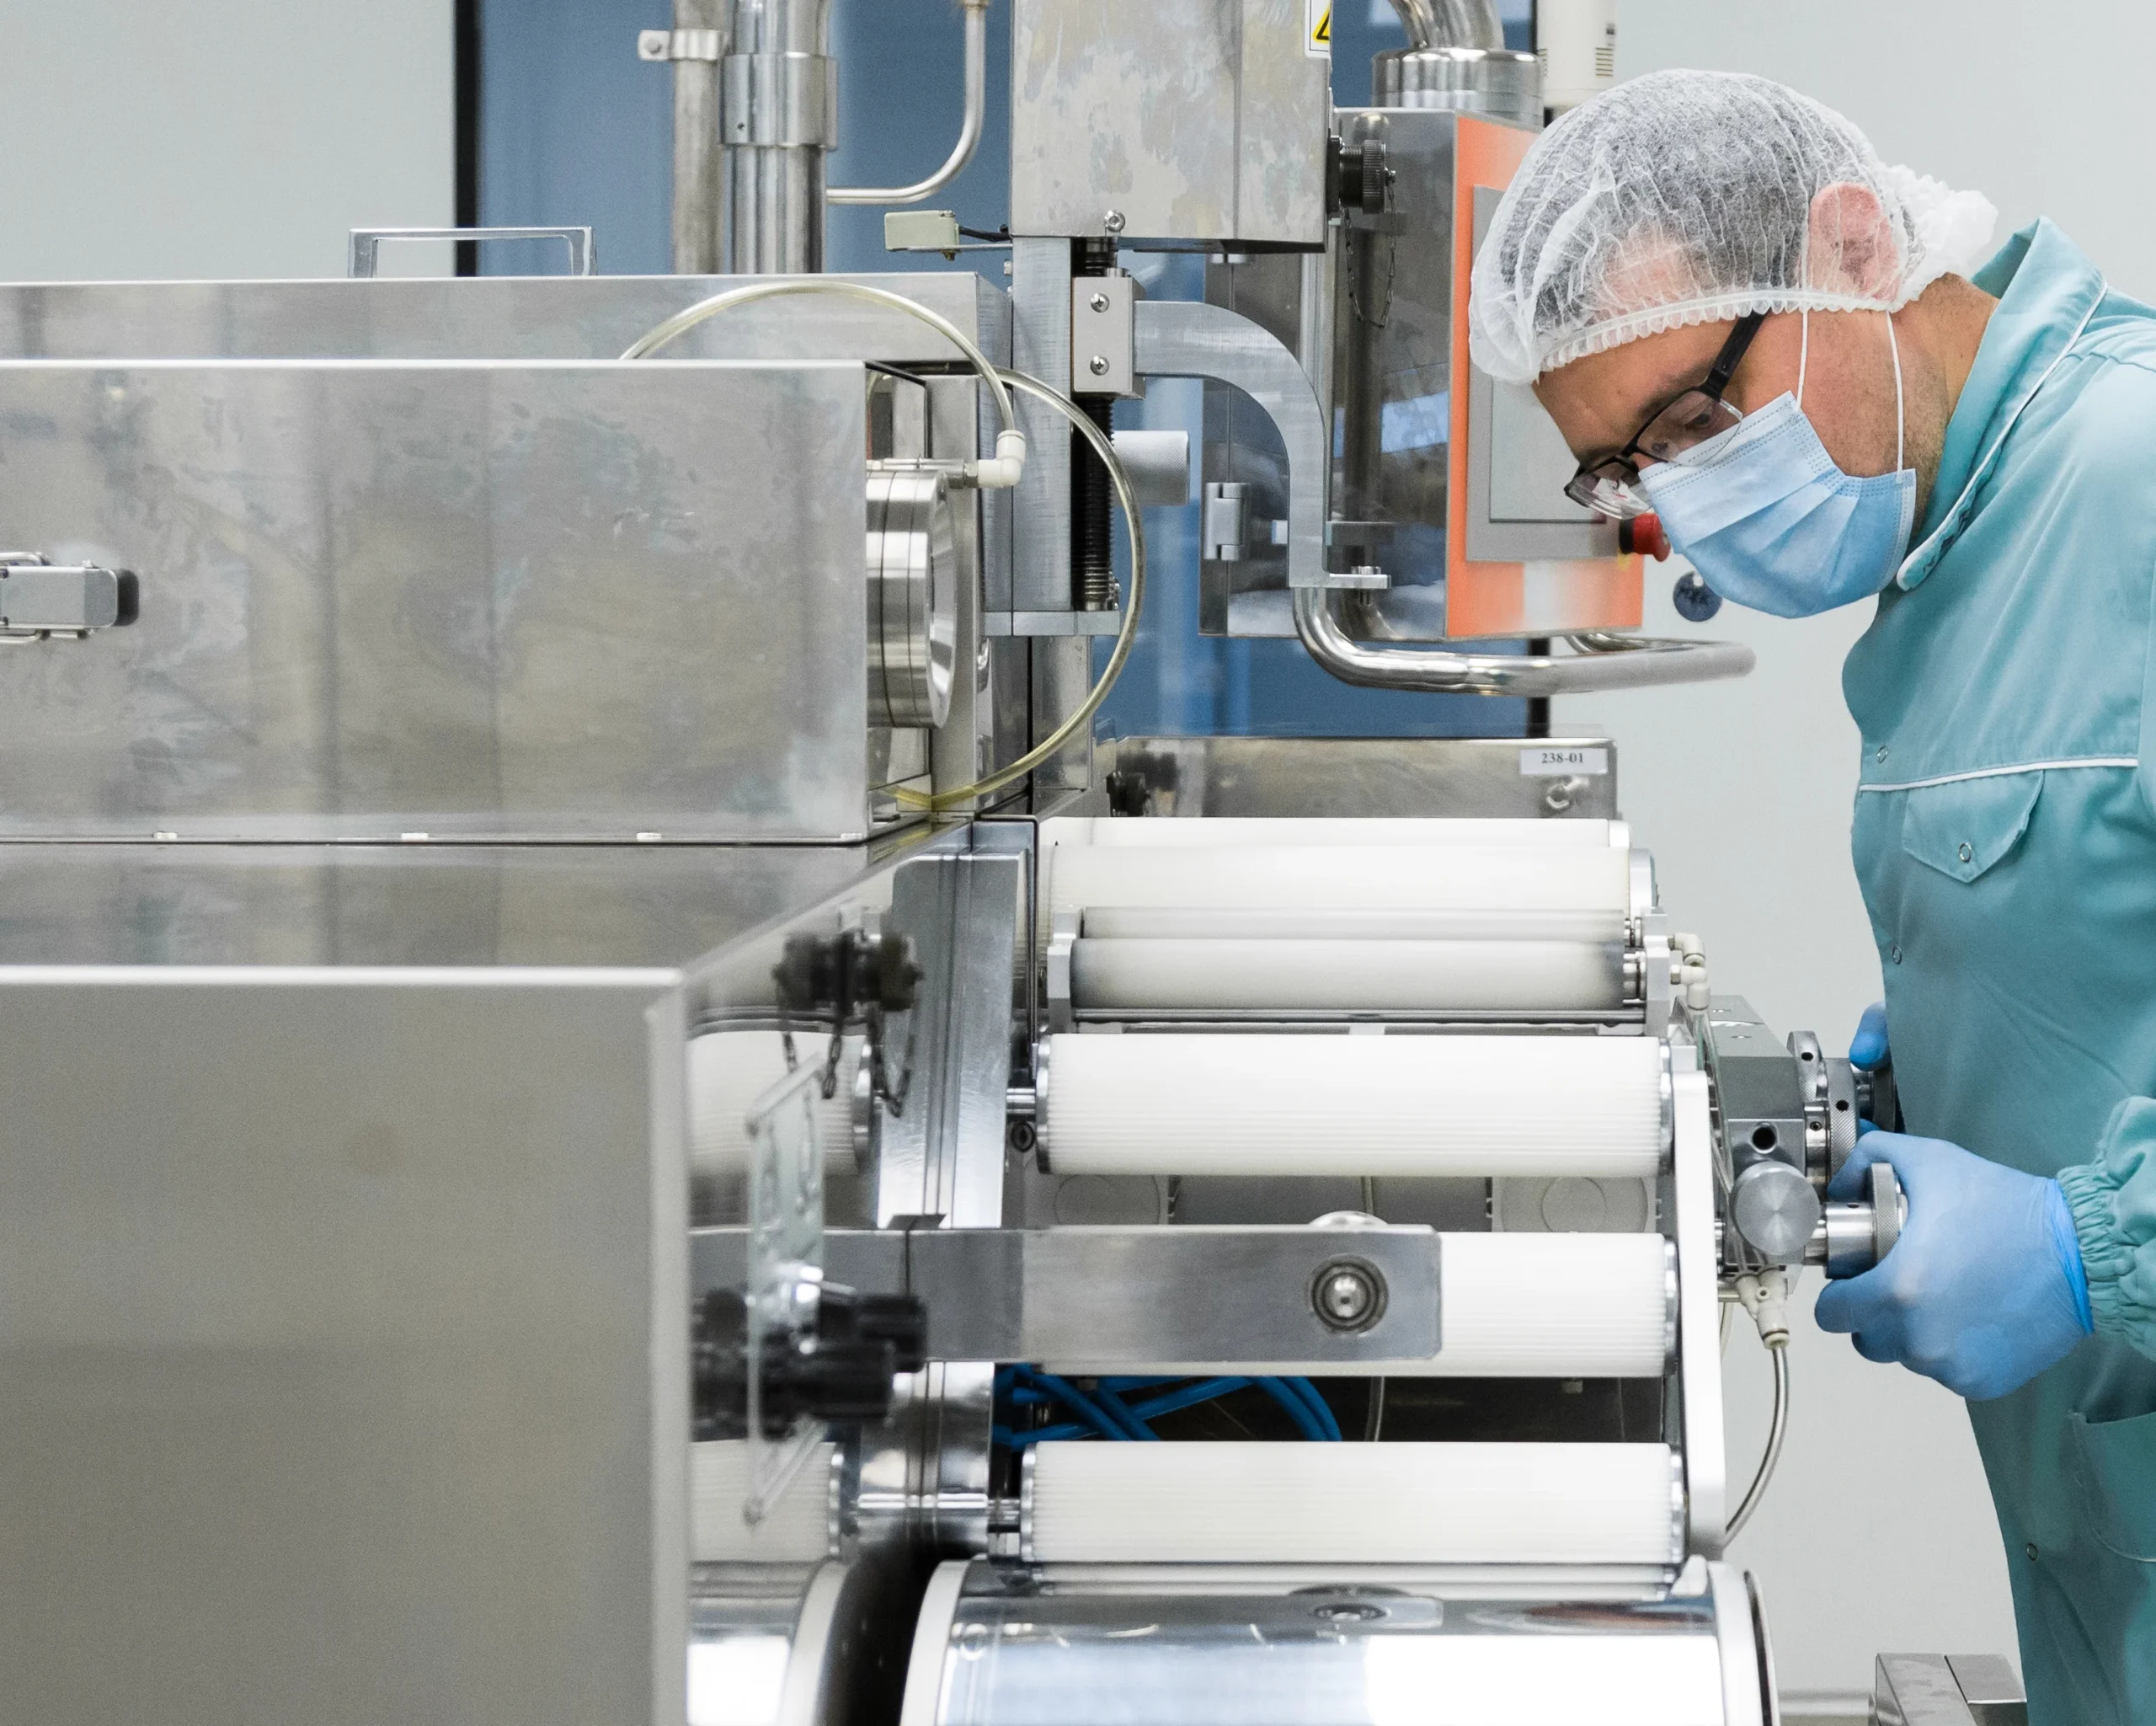 In a highly sanitized environment, a diligent worker in protective attire can be seen operating pharmaceutical equipment within a pharmacy industry factory